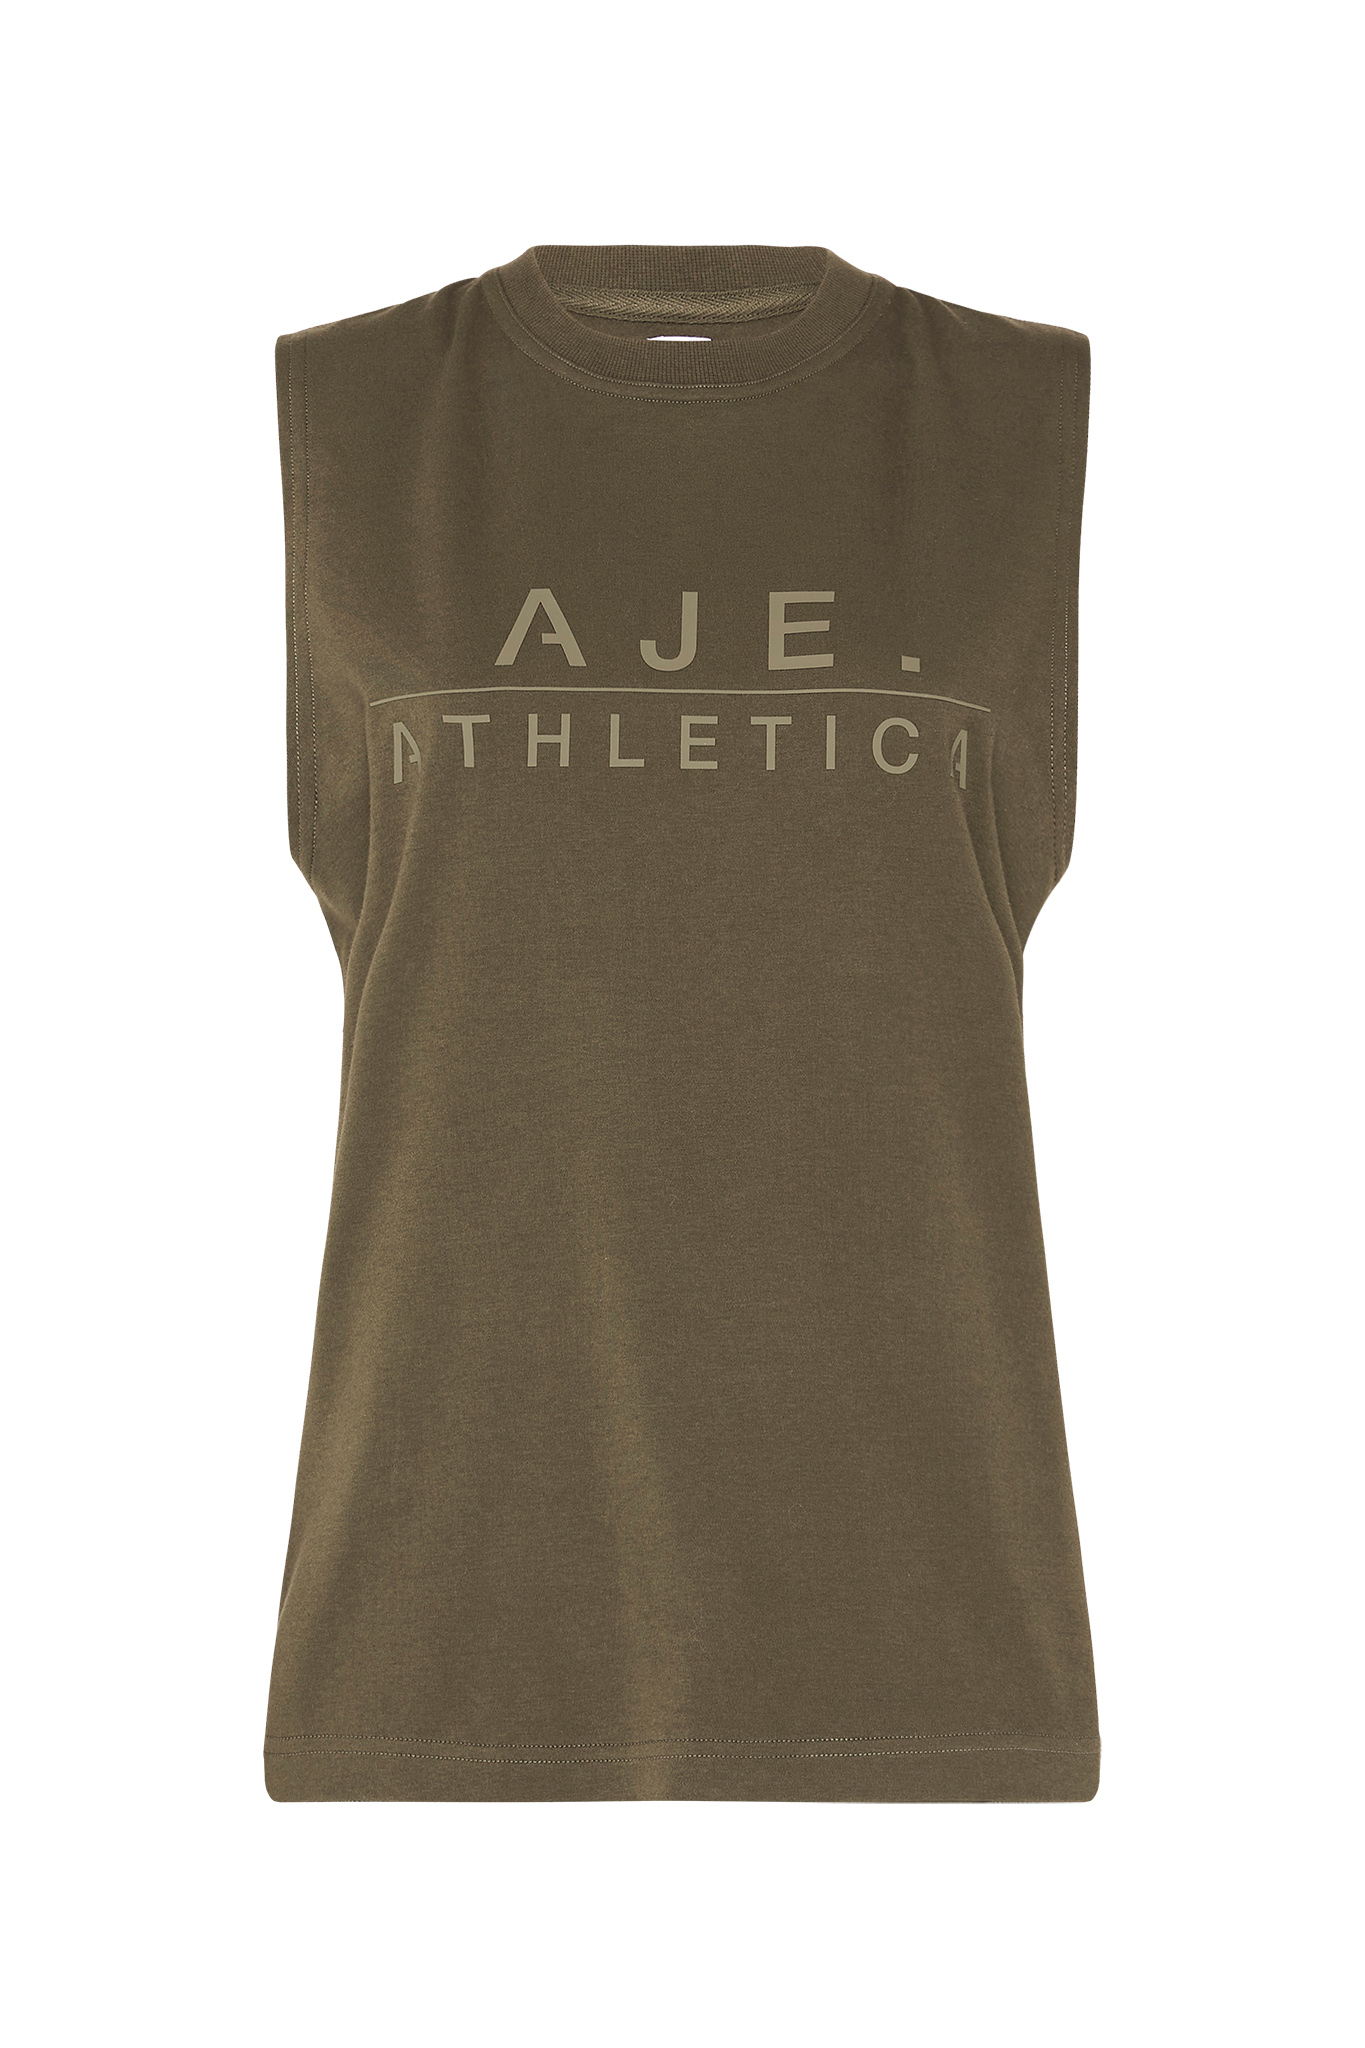 Aje Announces The Launch Of Aje Athletica, A Capsule Collection Focused On  Athletic-Wear